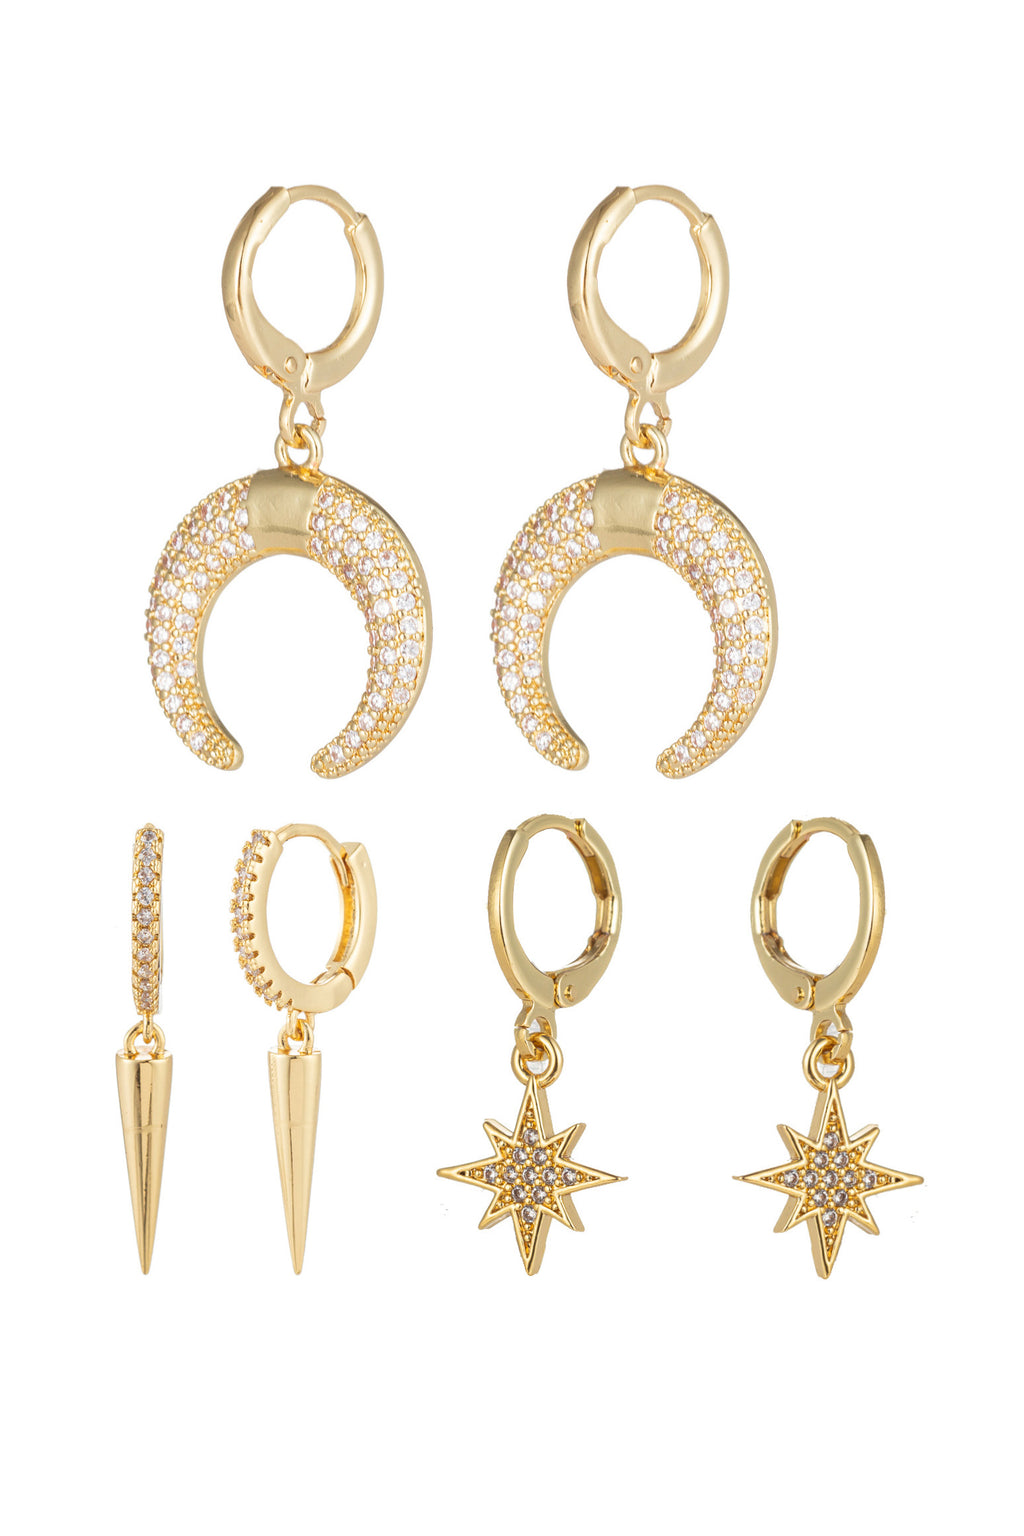 North Star 18k gold plated huggie earring set.